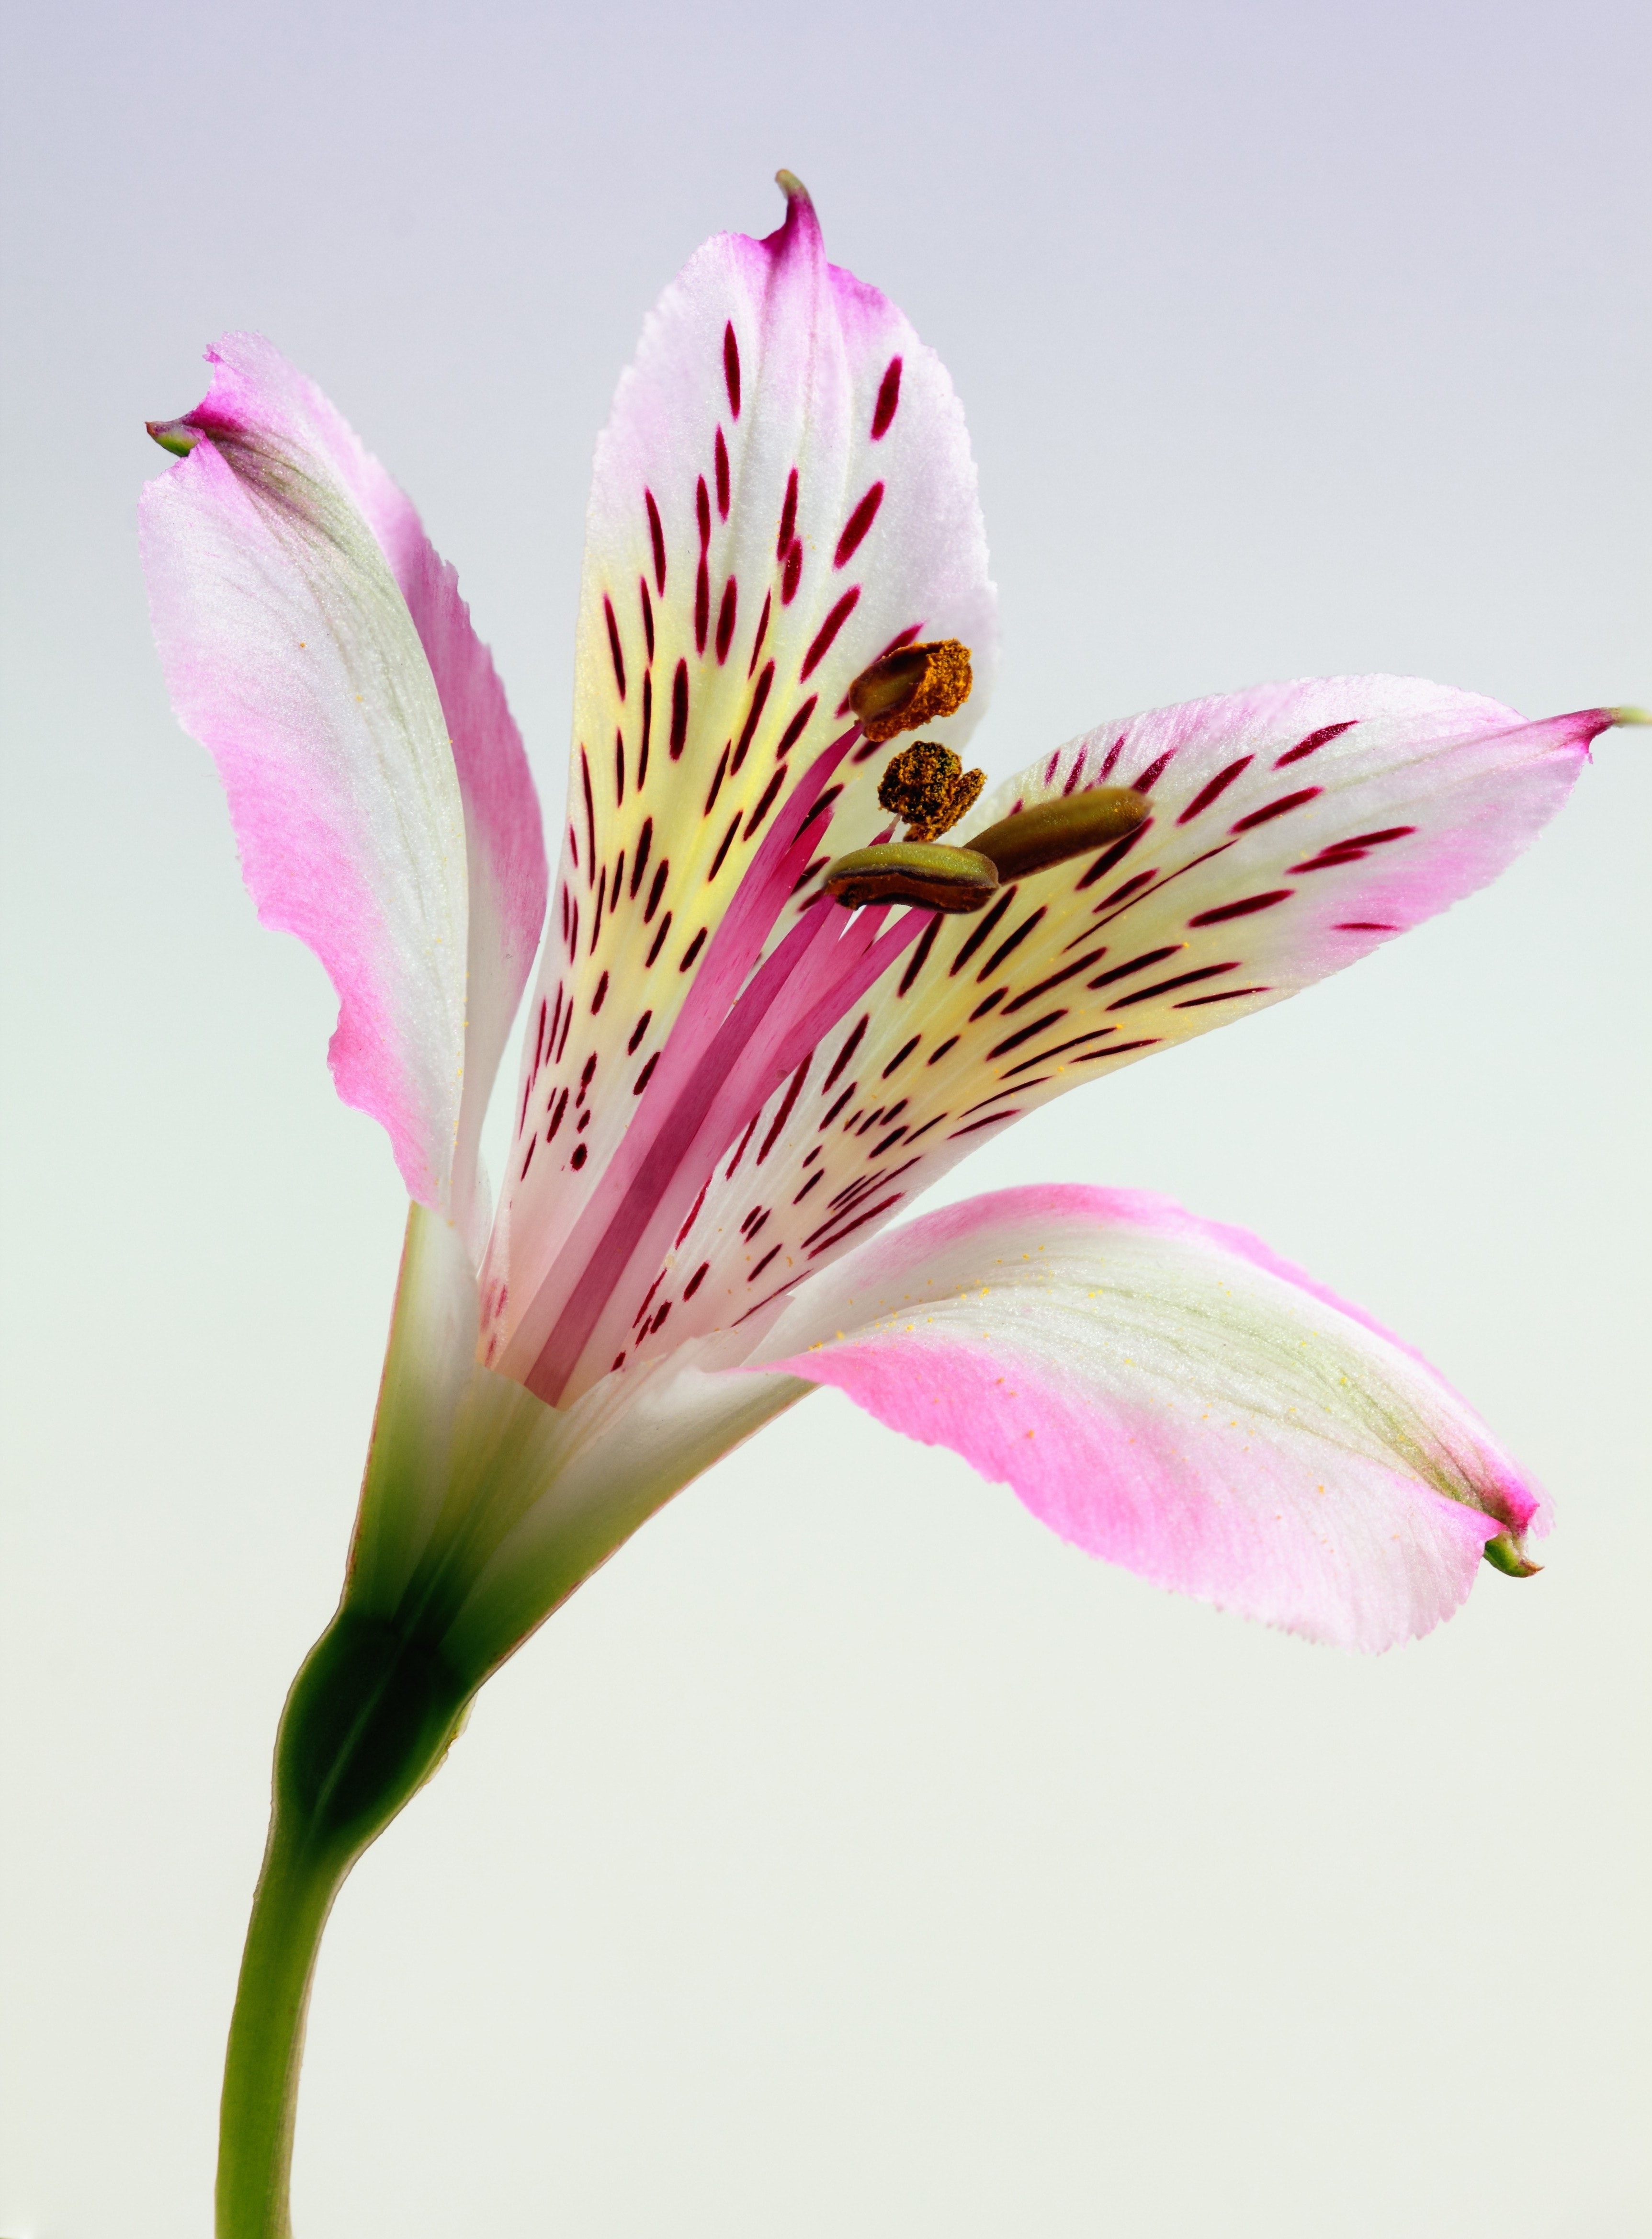 Shallow focus photography of pink and white petal flower